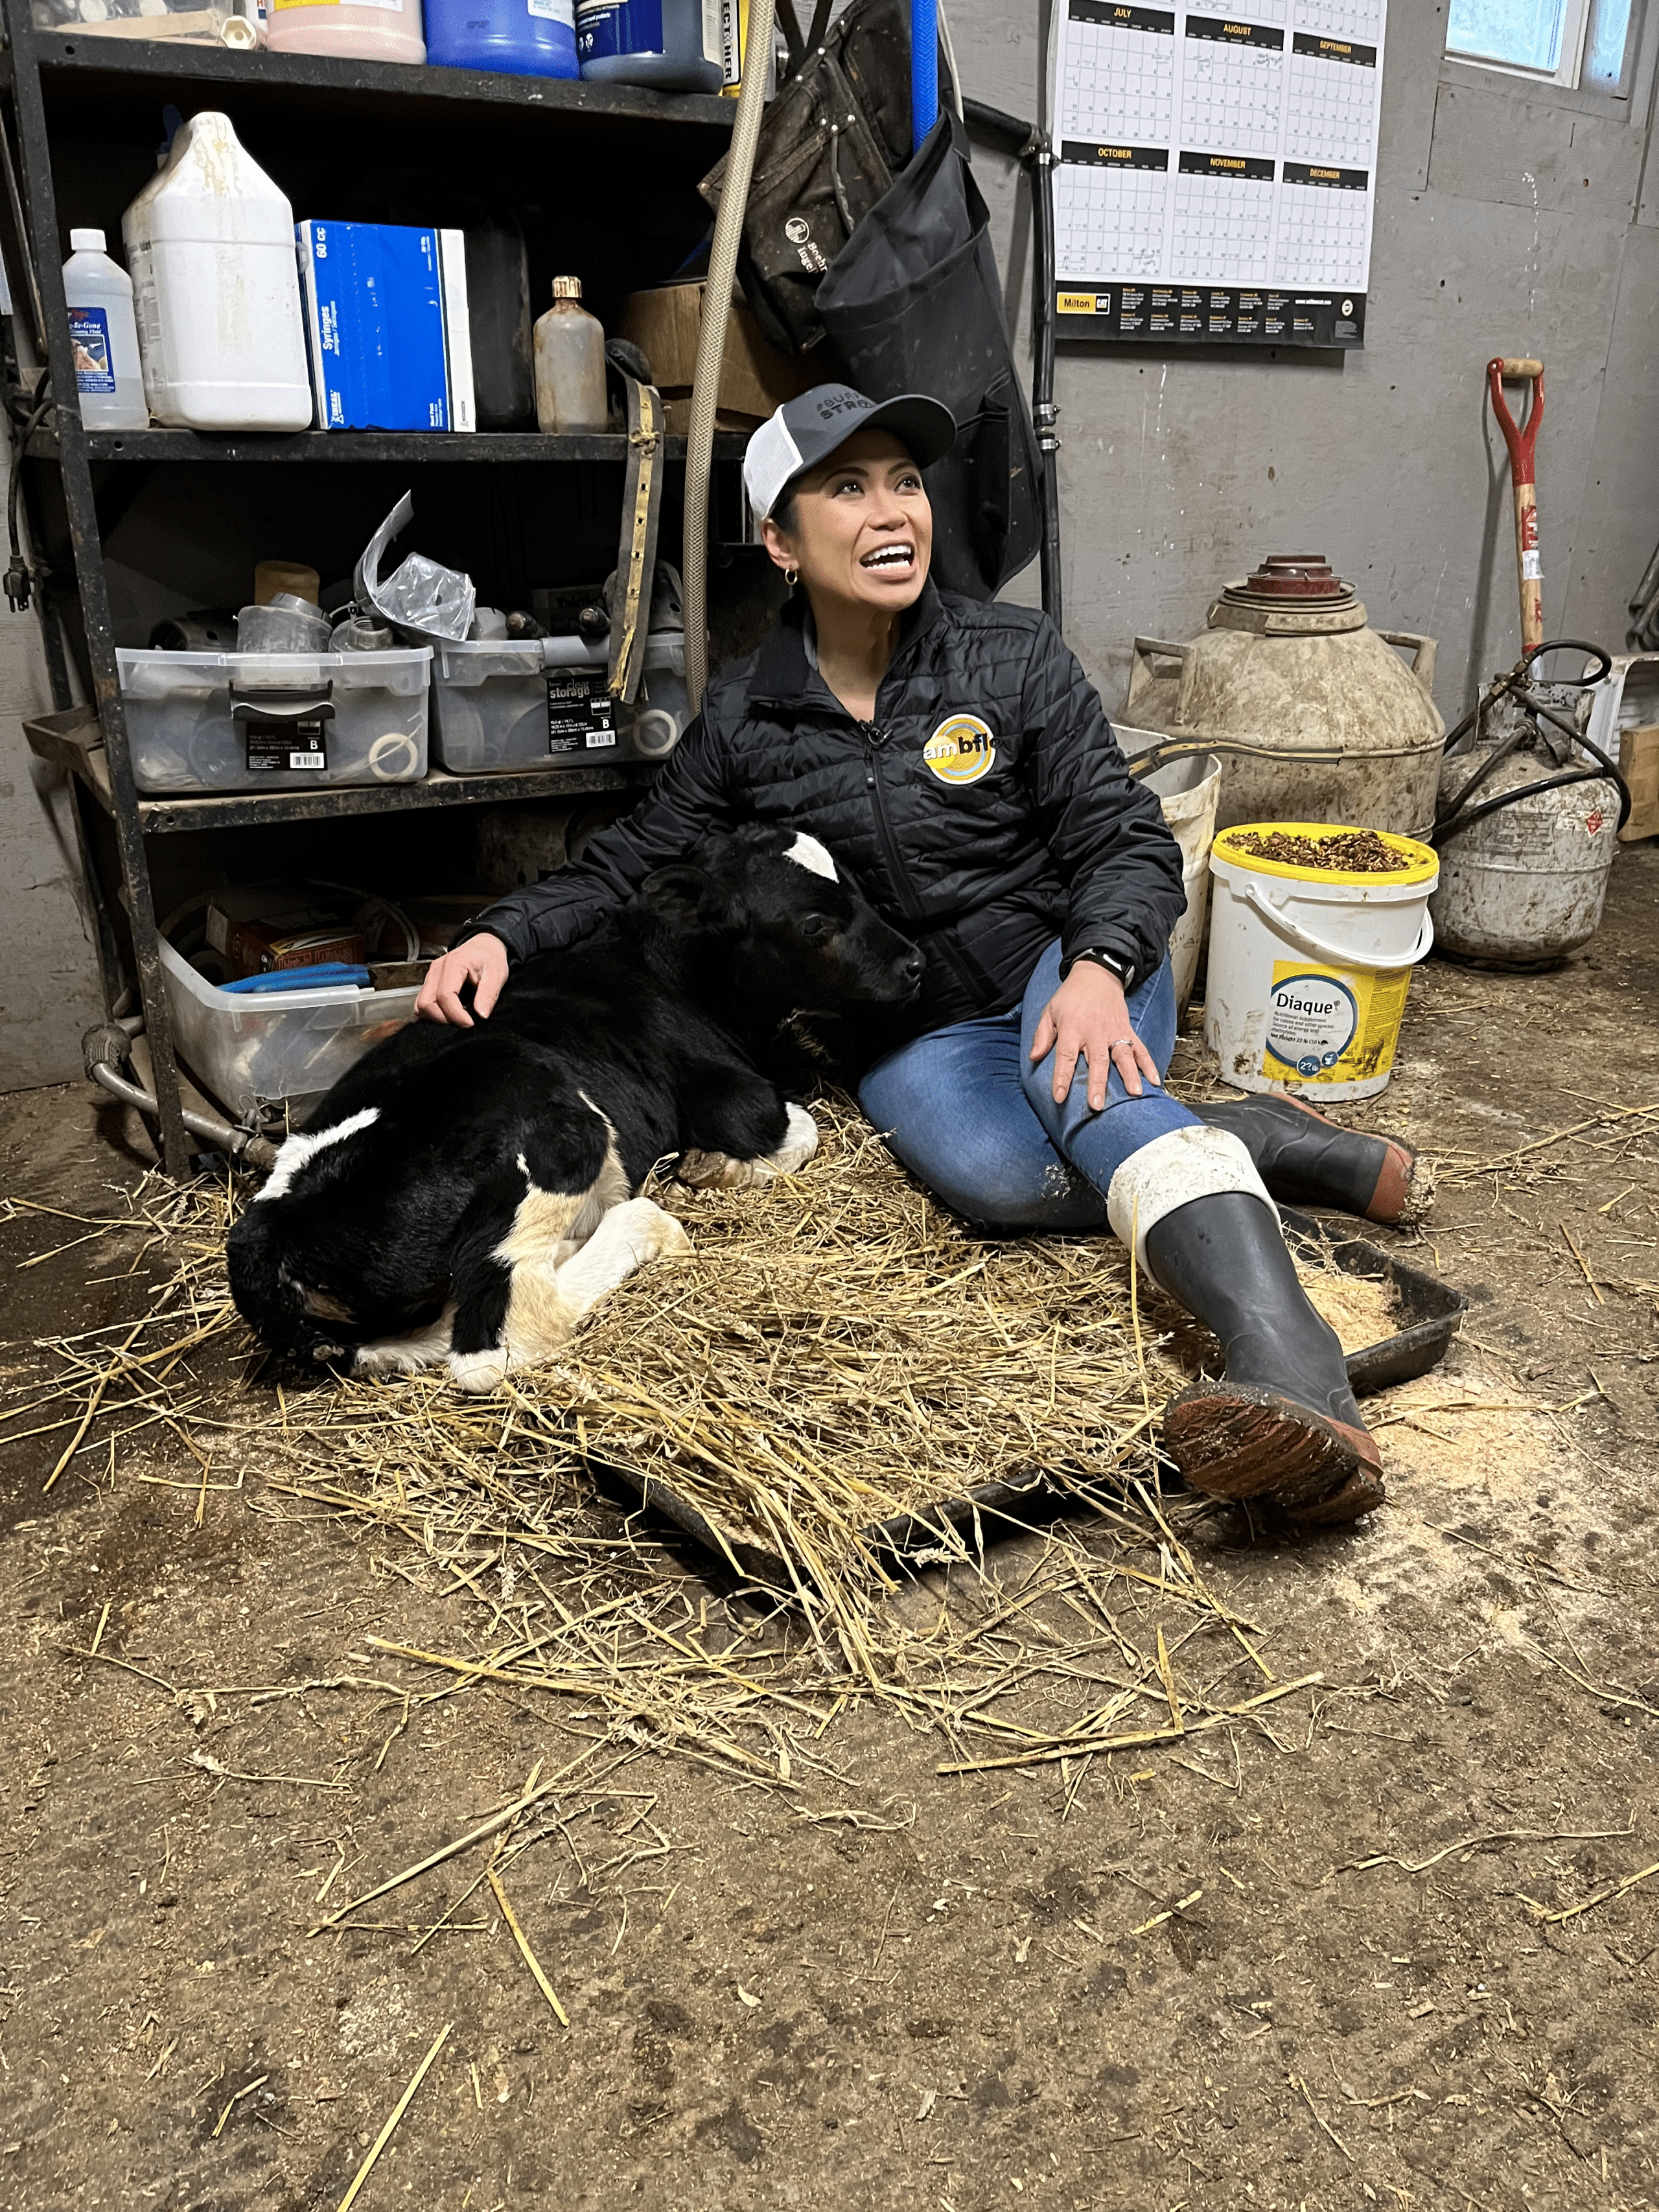 Woman smiling while petting a calf